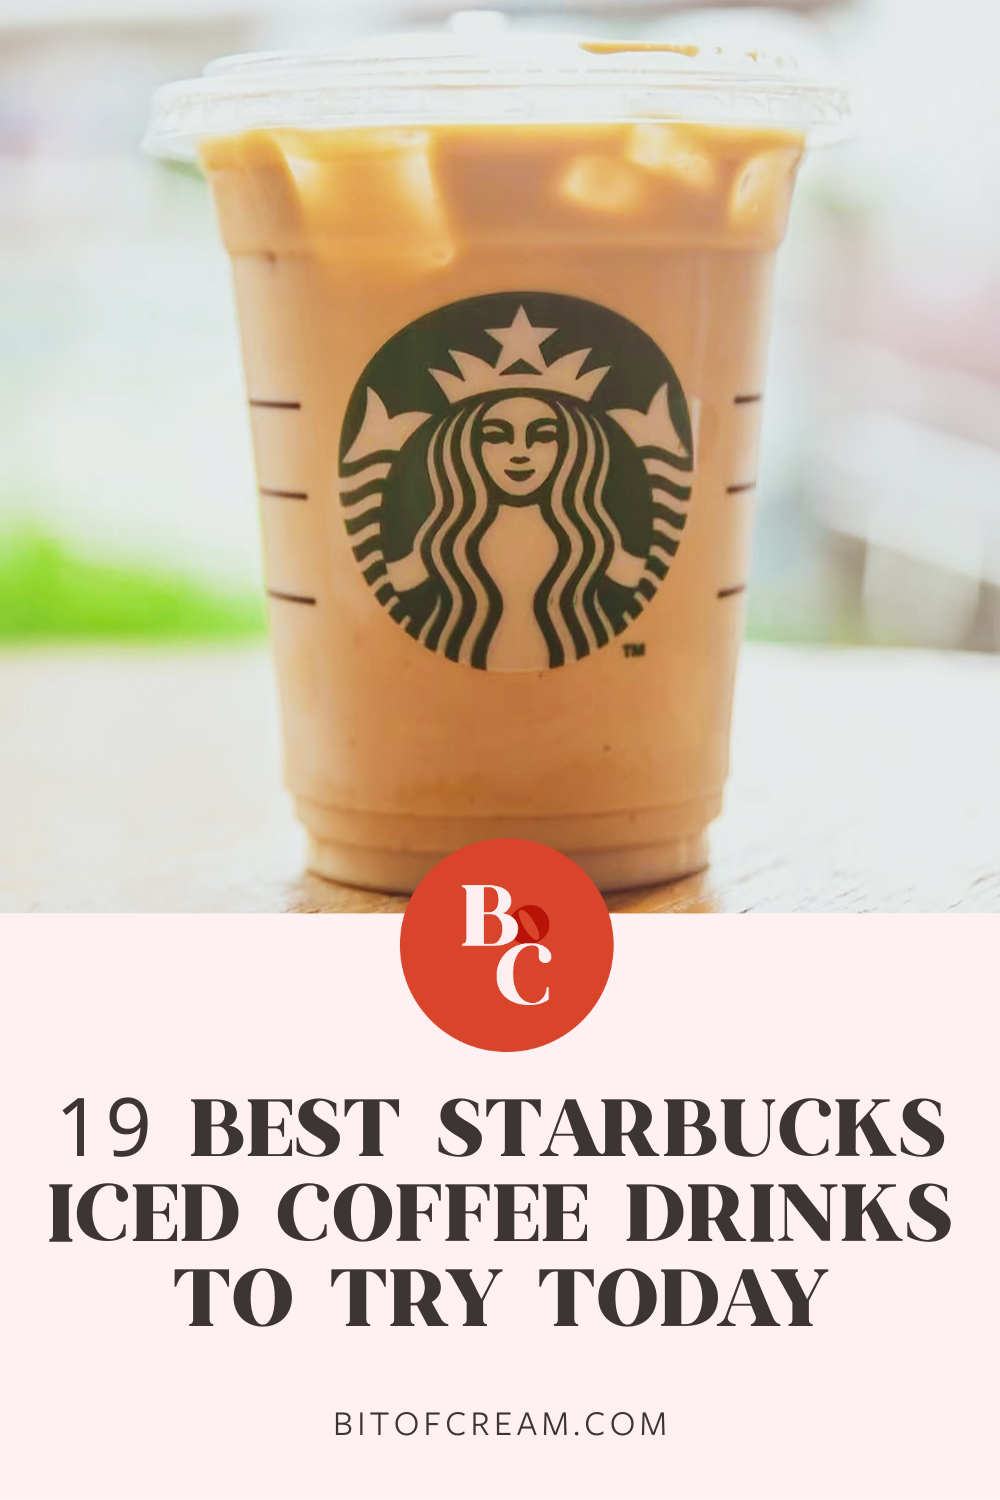 19 Best Starbucks Iced Coffee Drinks to Try Today